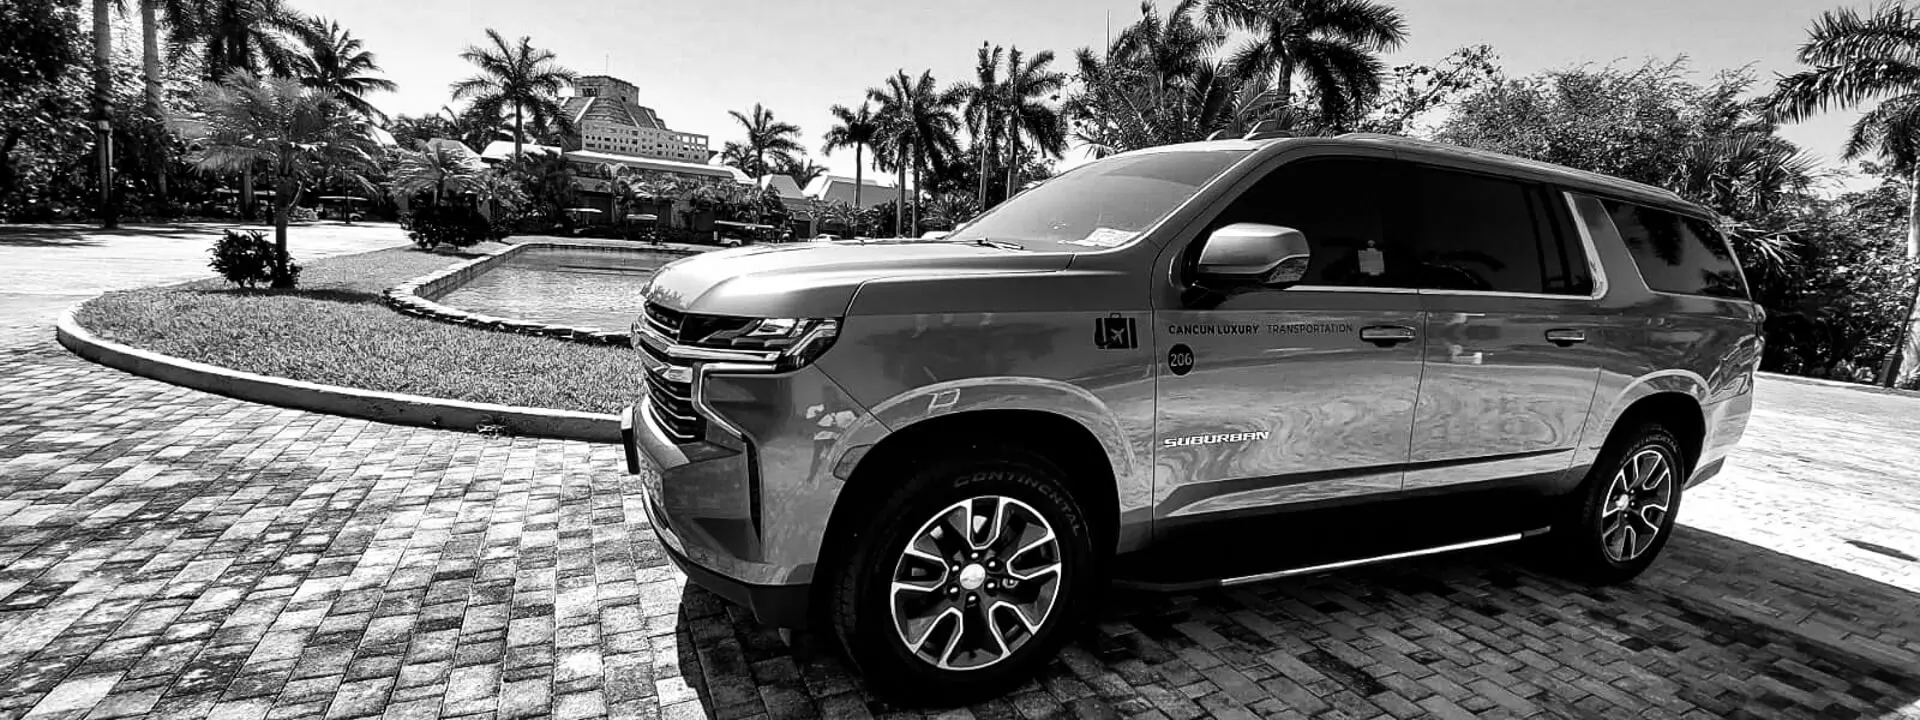 Cancun Luxury Transportation service in SUV vehicles in Cancun and the Riviera Maya.